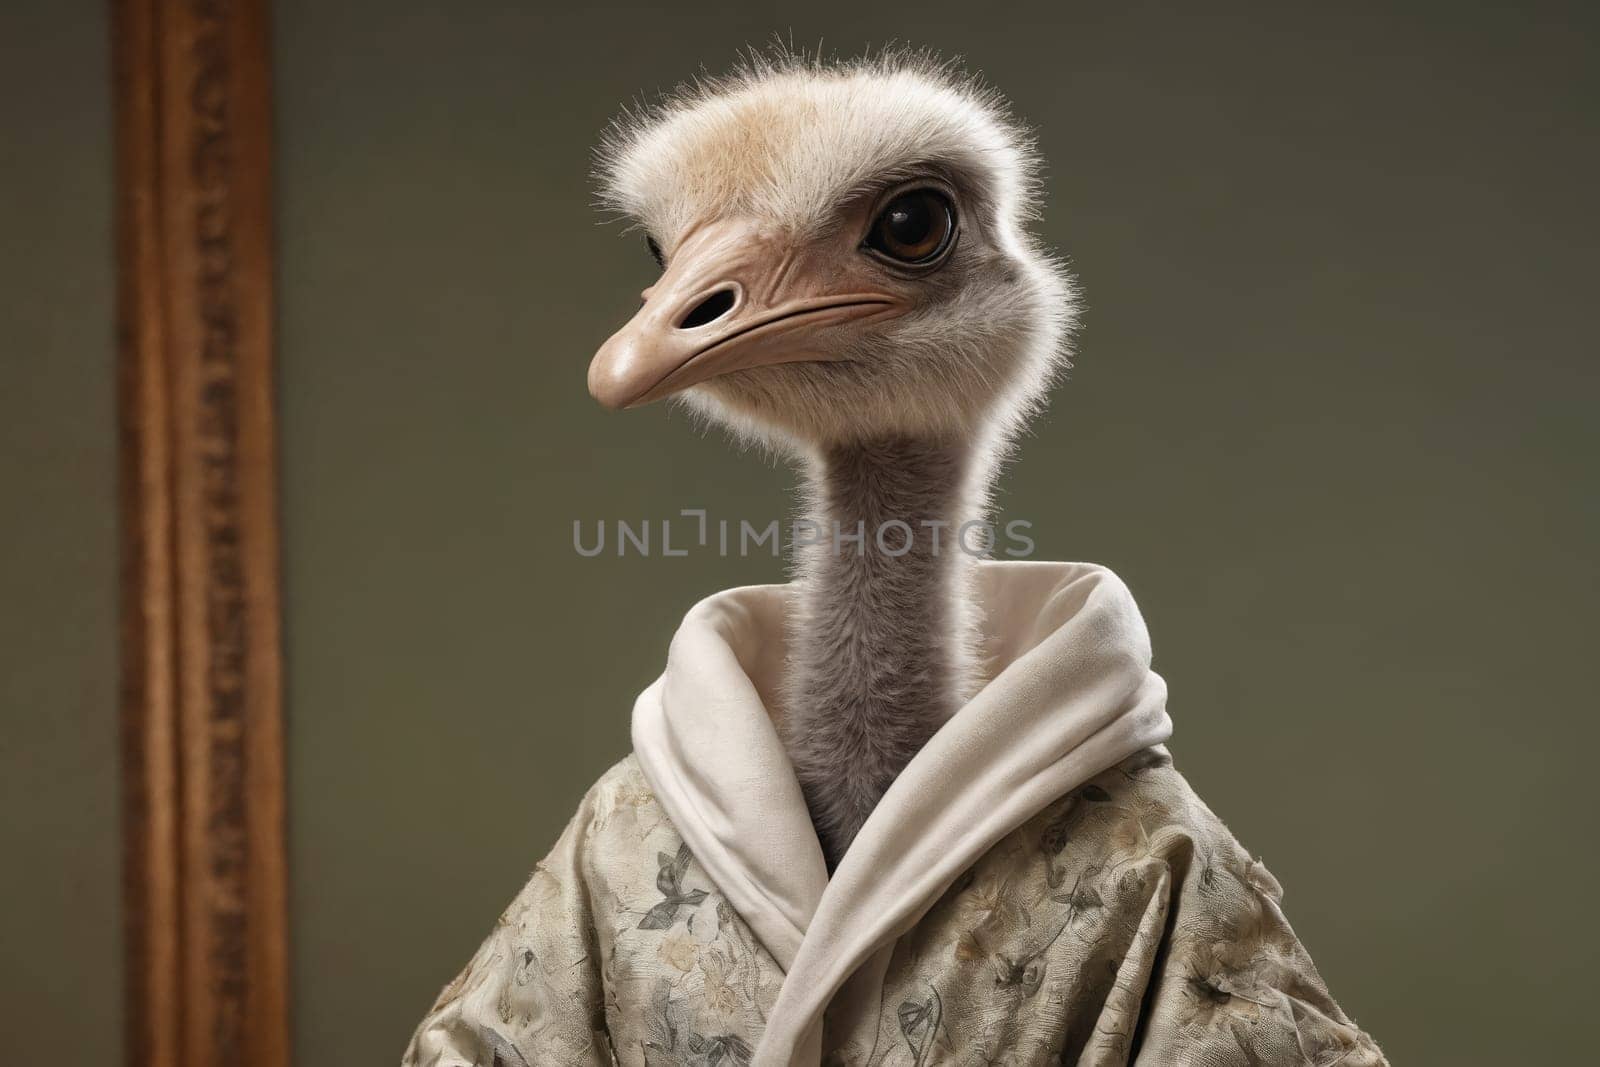 Elegance Unfeathered: Ostrich Adorning a Dress by Andre1ns